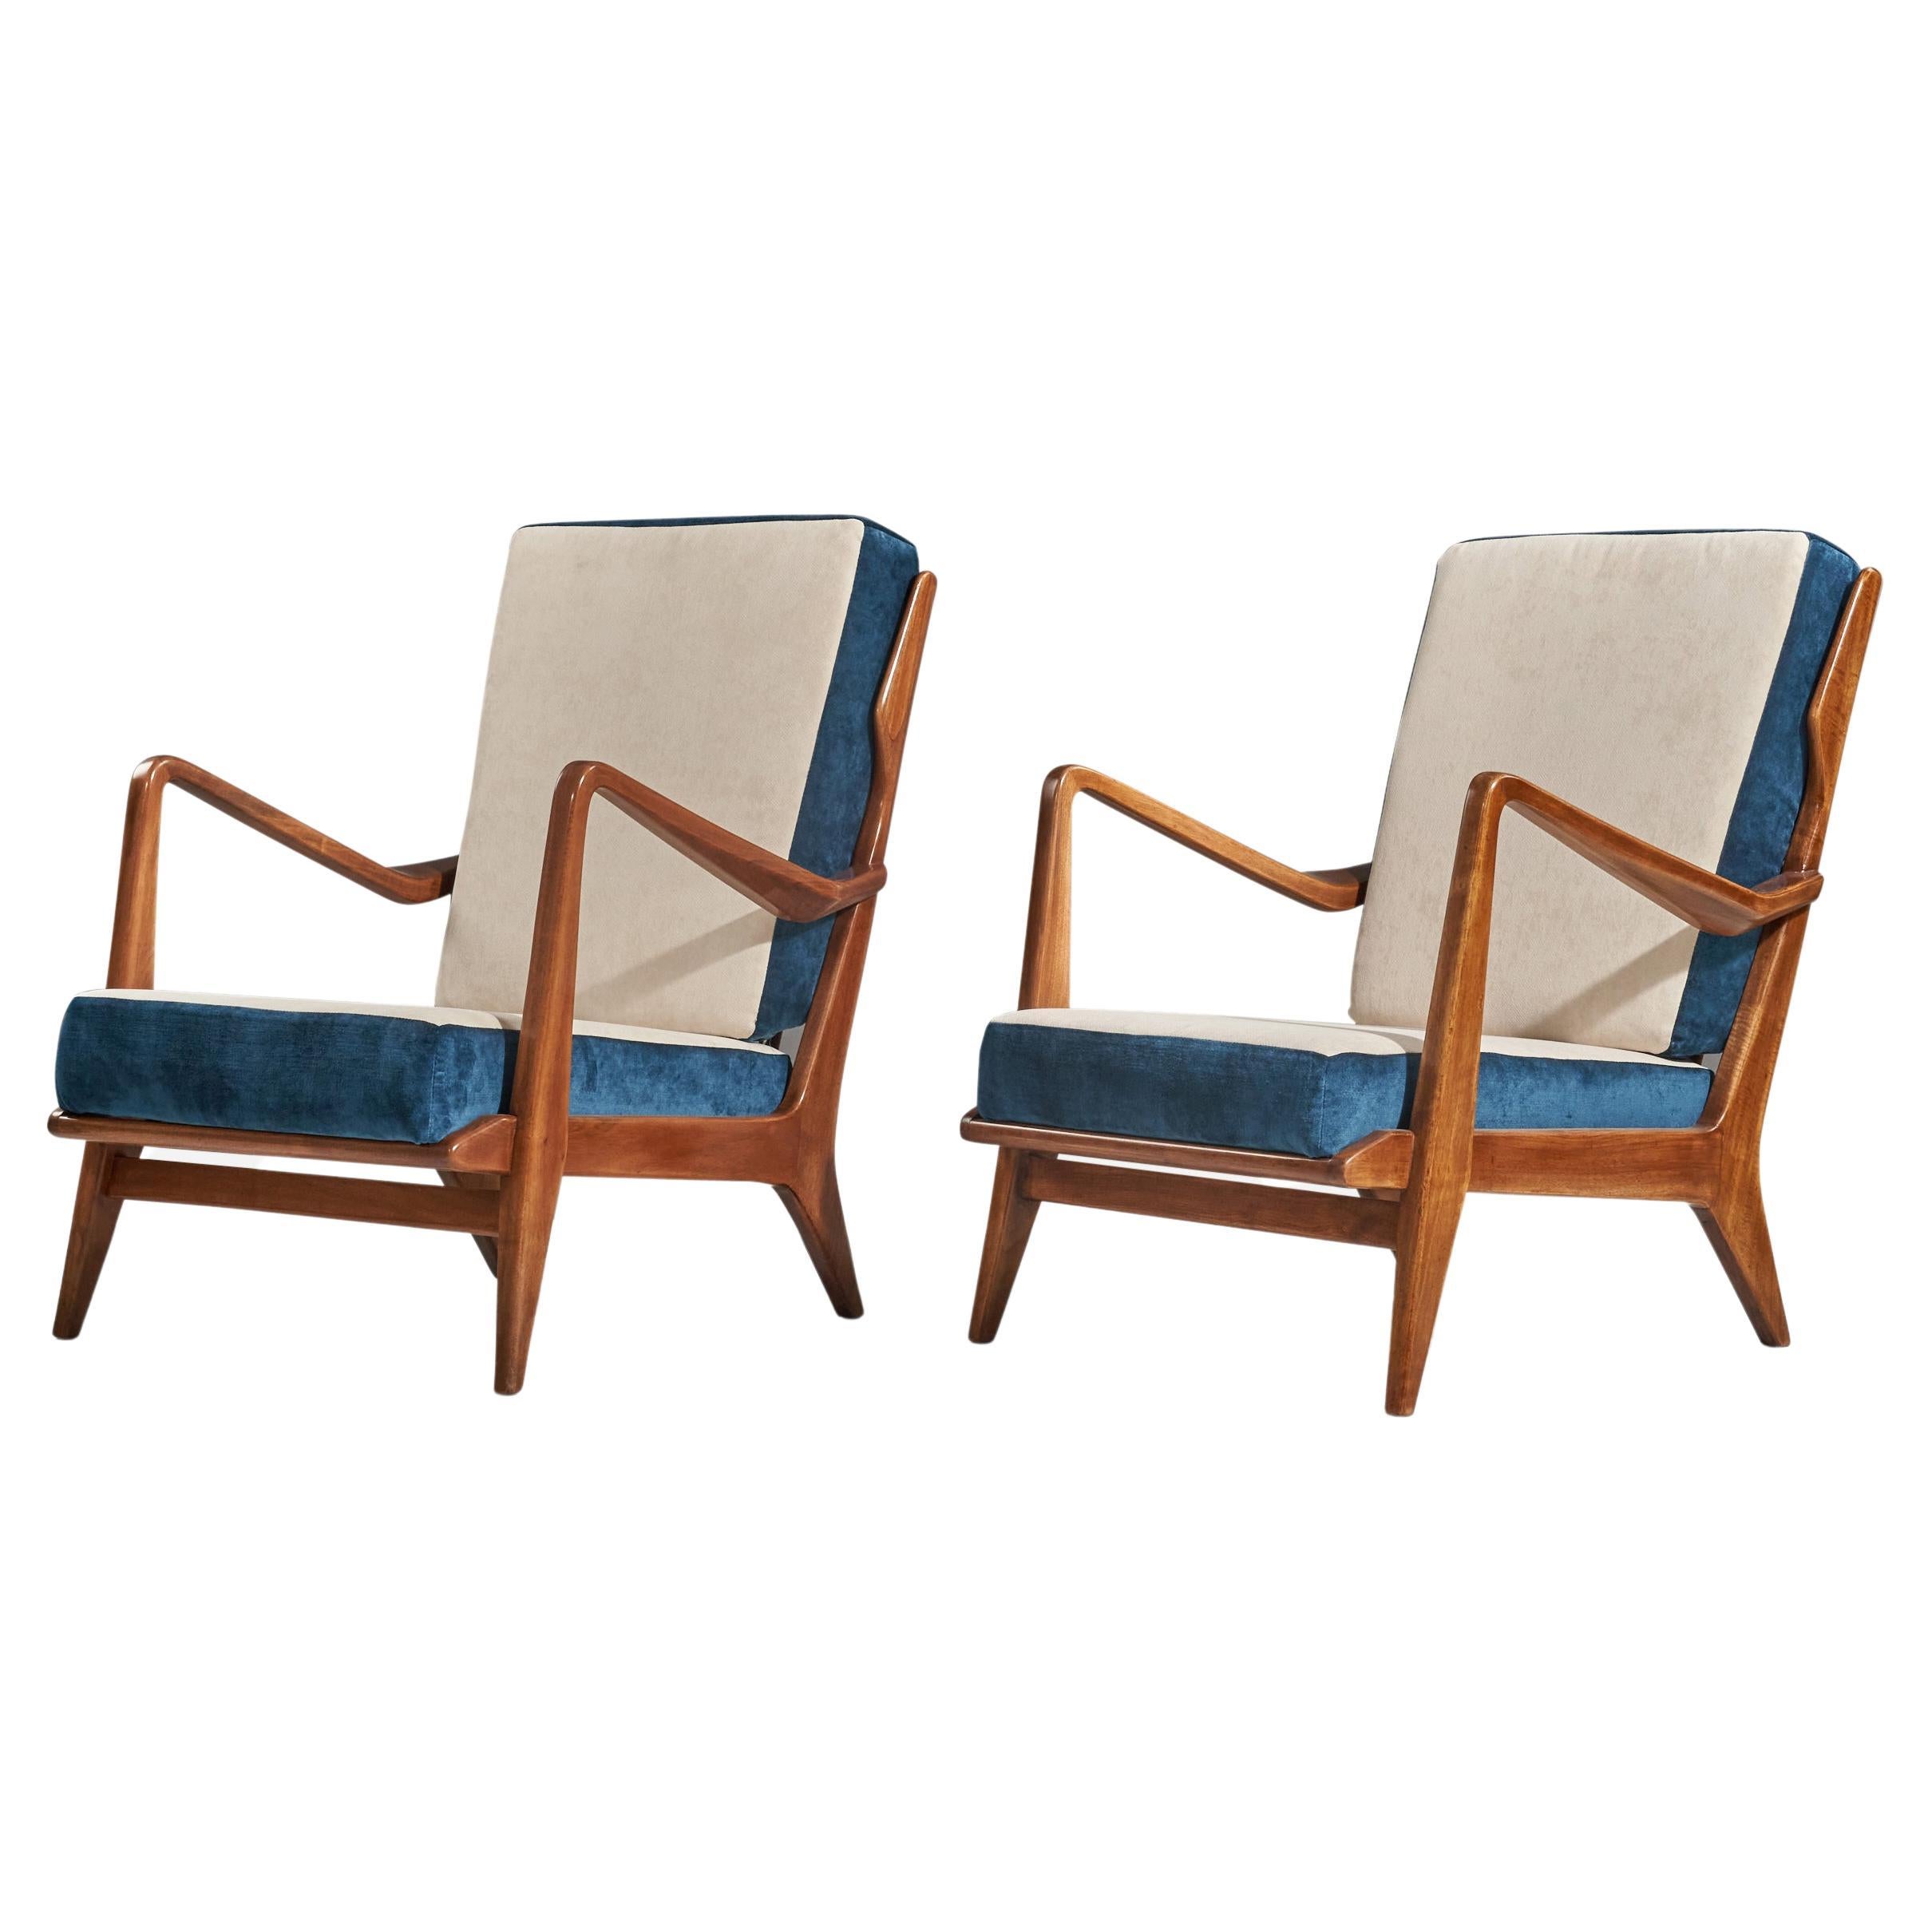 Gio Ponti, Lounge Chairs, Walnut, Blue And White Velvet, Cassina, Italy, 1950s